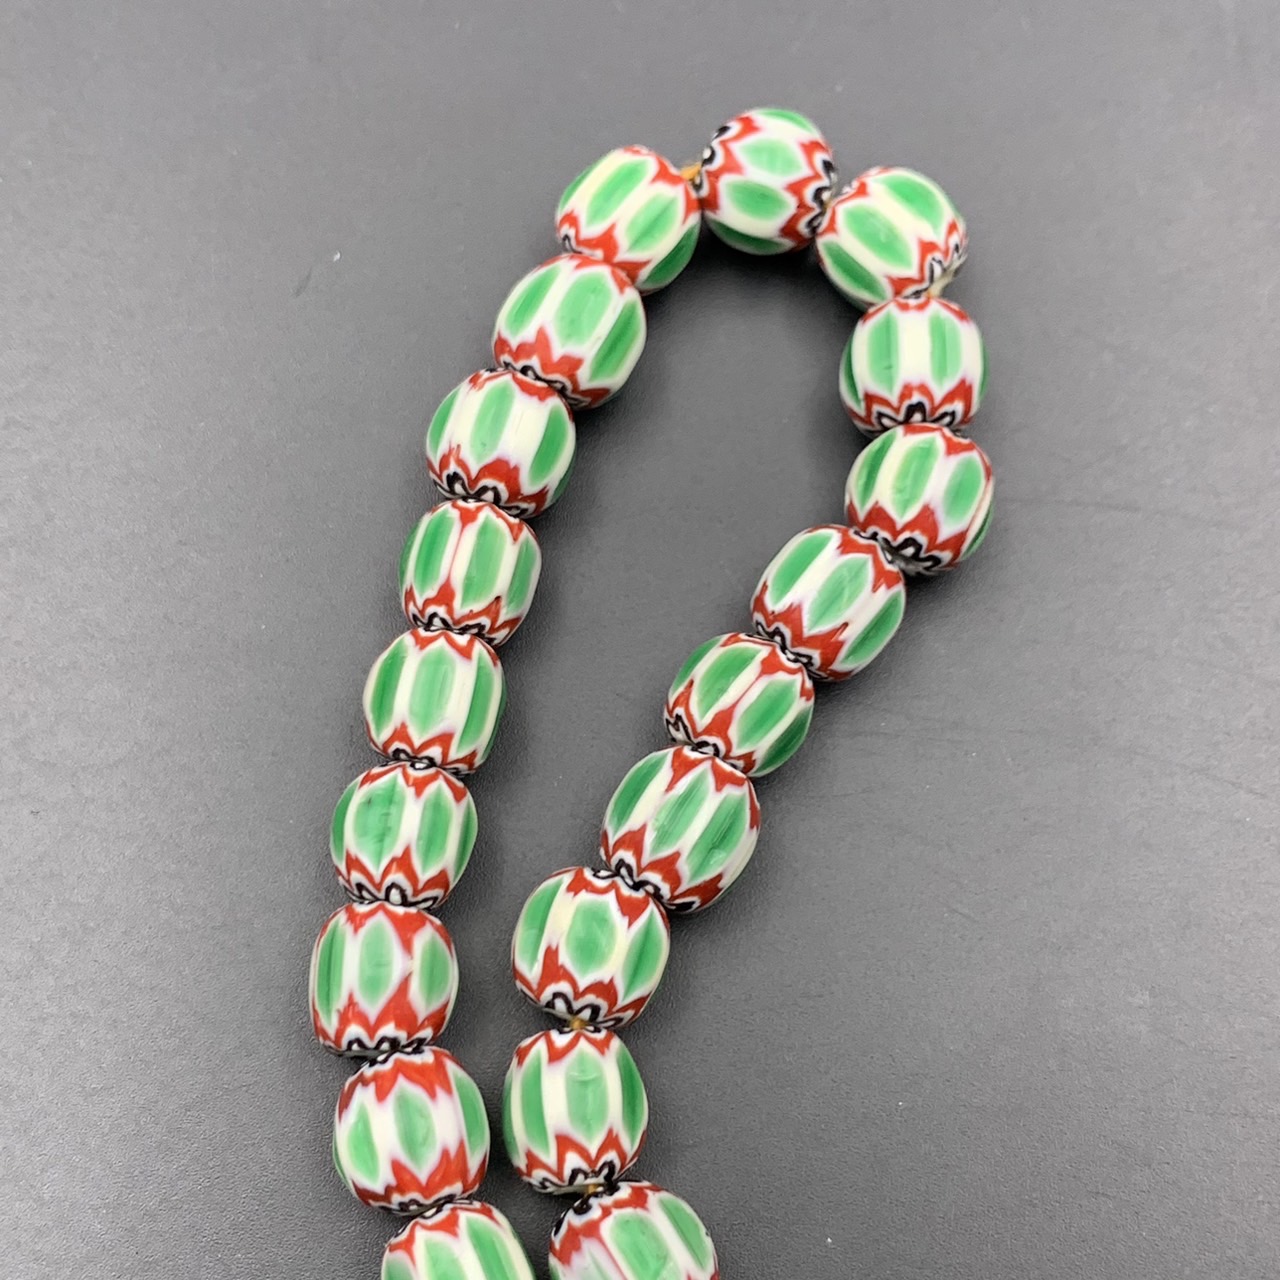 Wonderful Green Vintage Chevron Trade African Glass Beads Strand, LPBR-0322 - Image 4 of 8